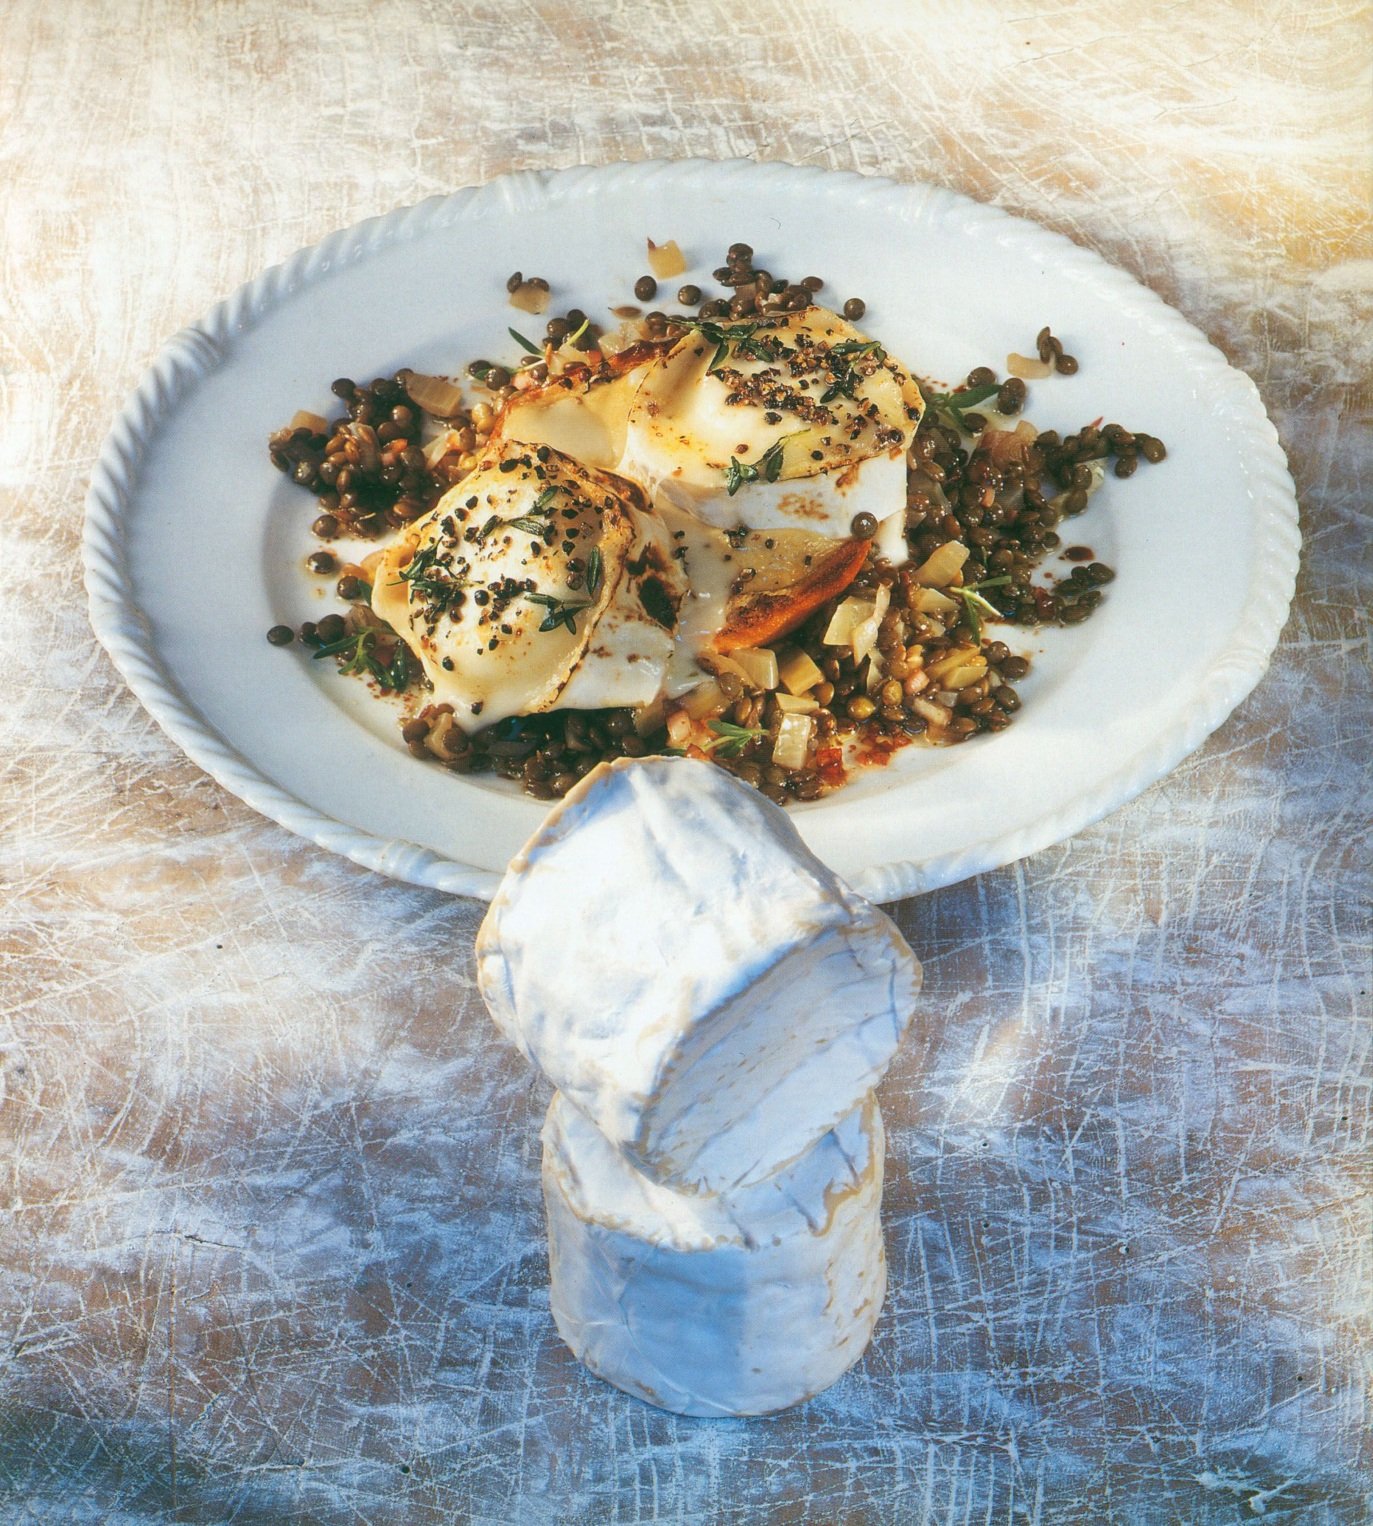 Warm Lentil Salad with Pepper-grilled Goat’s Cheese & Anchovy Toasts from A Passion for Cheese by Paul Gayler